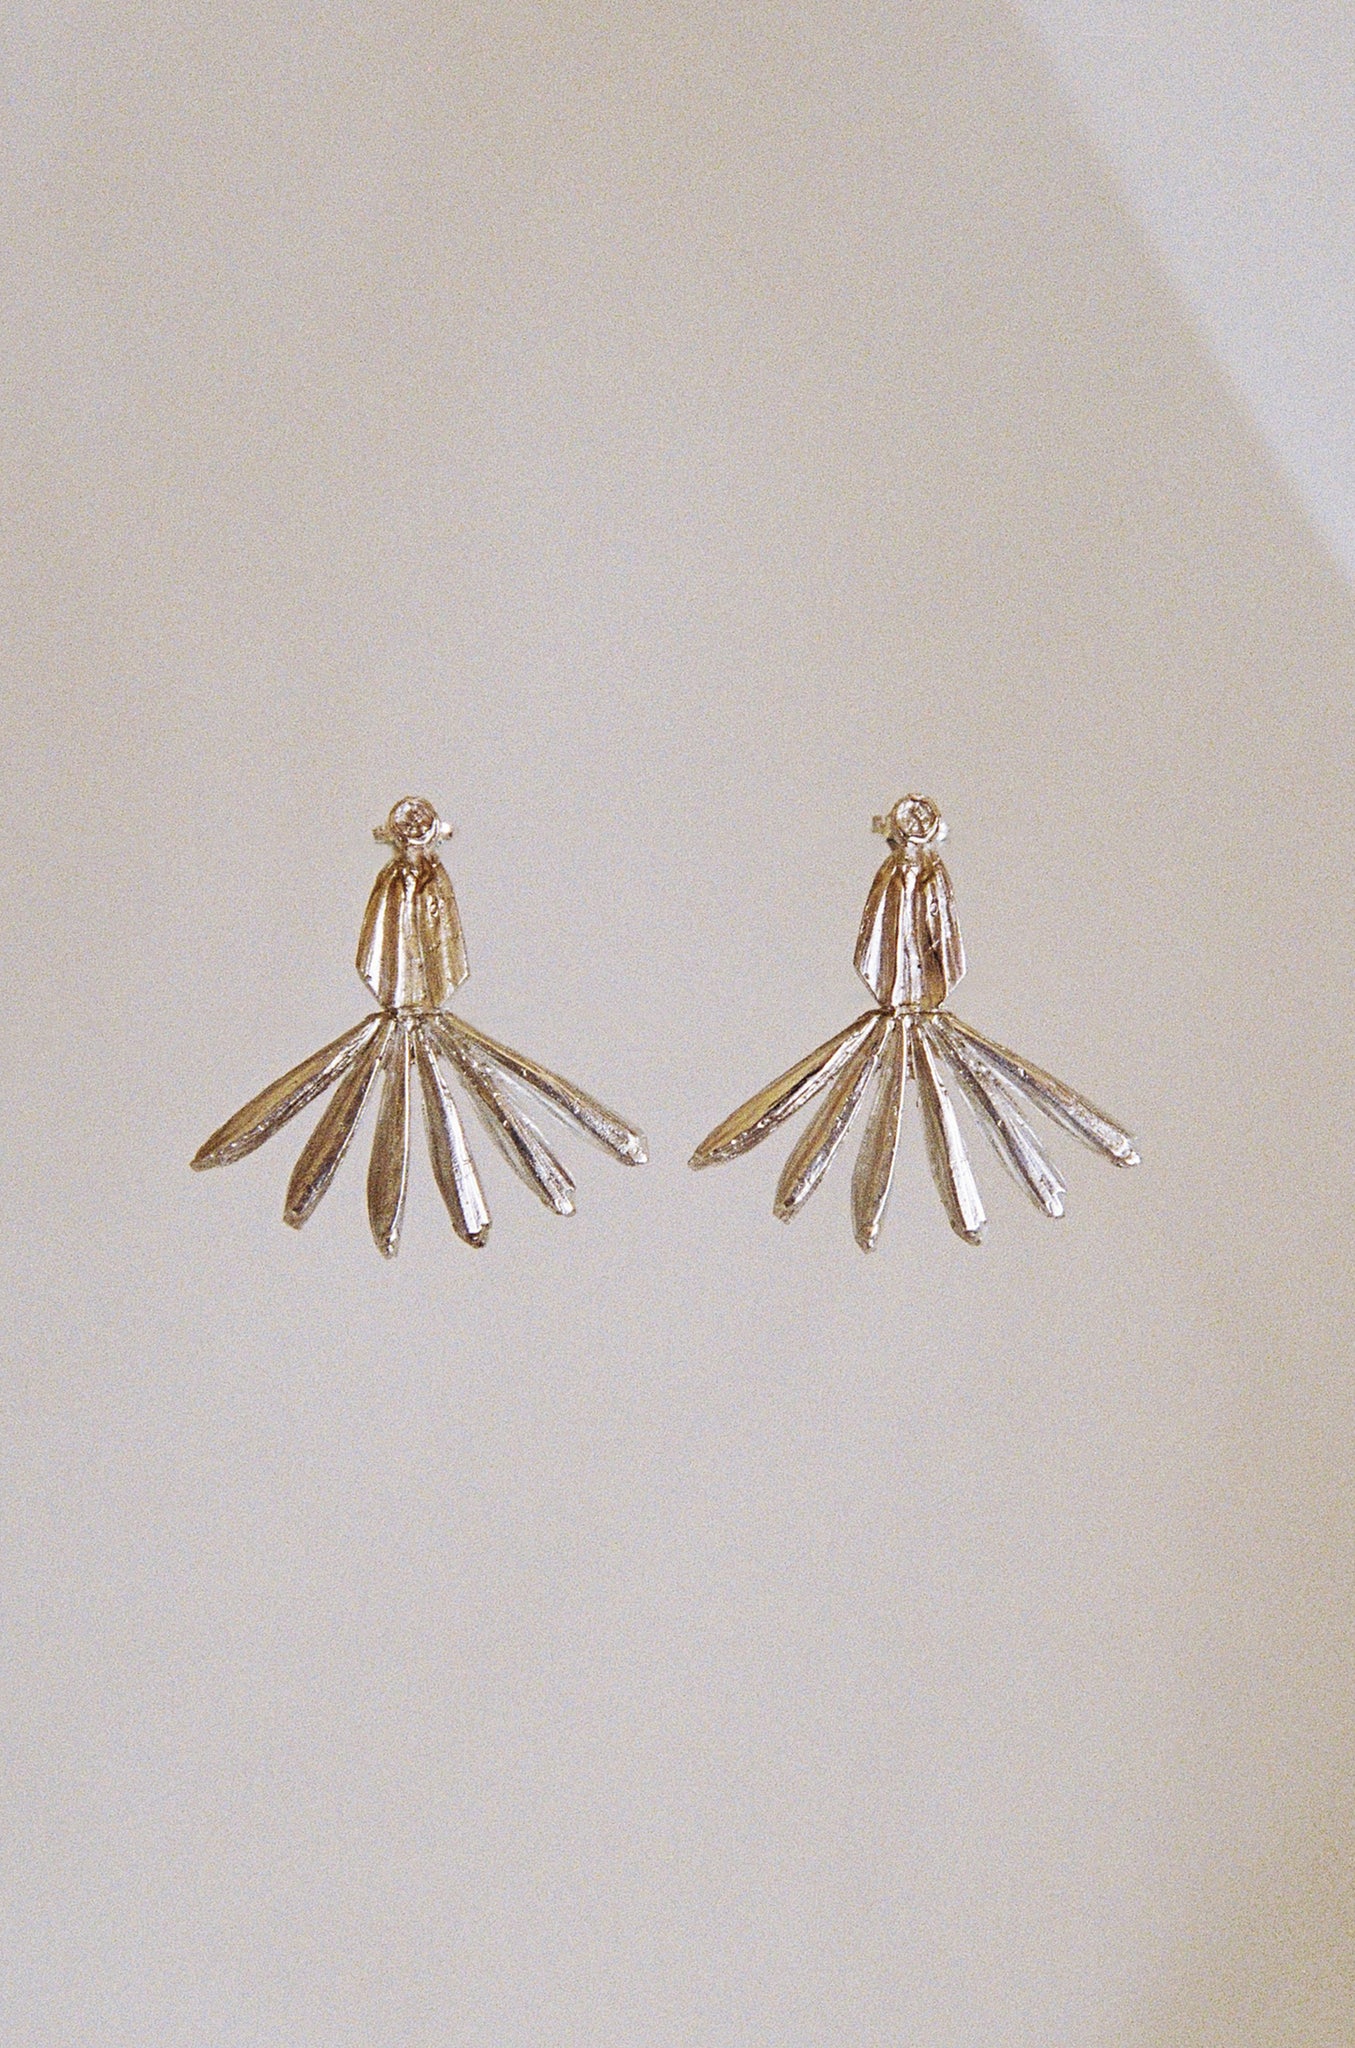 The Usual Place Earrings - Sterling Silver